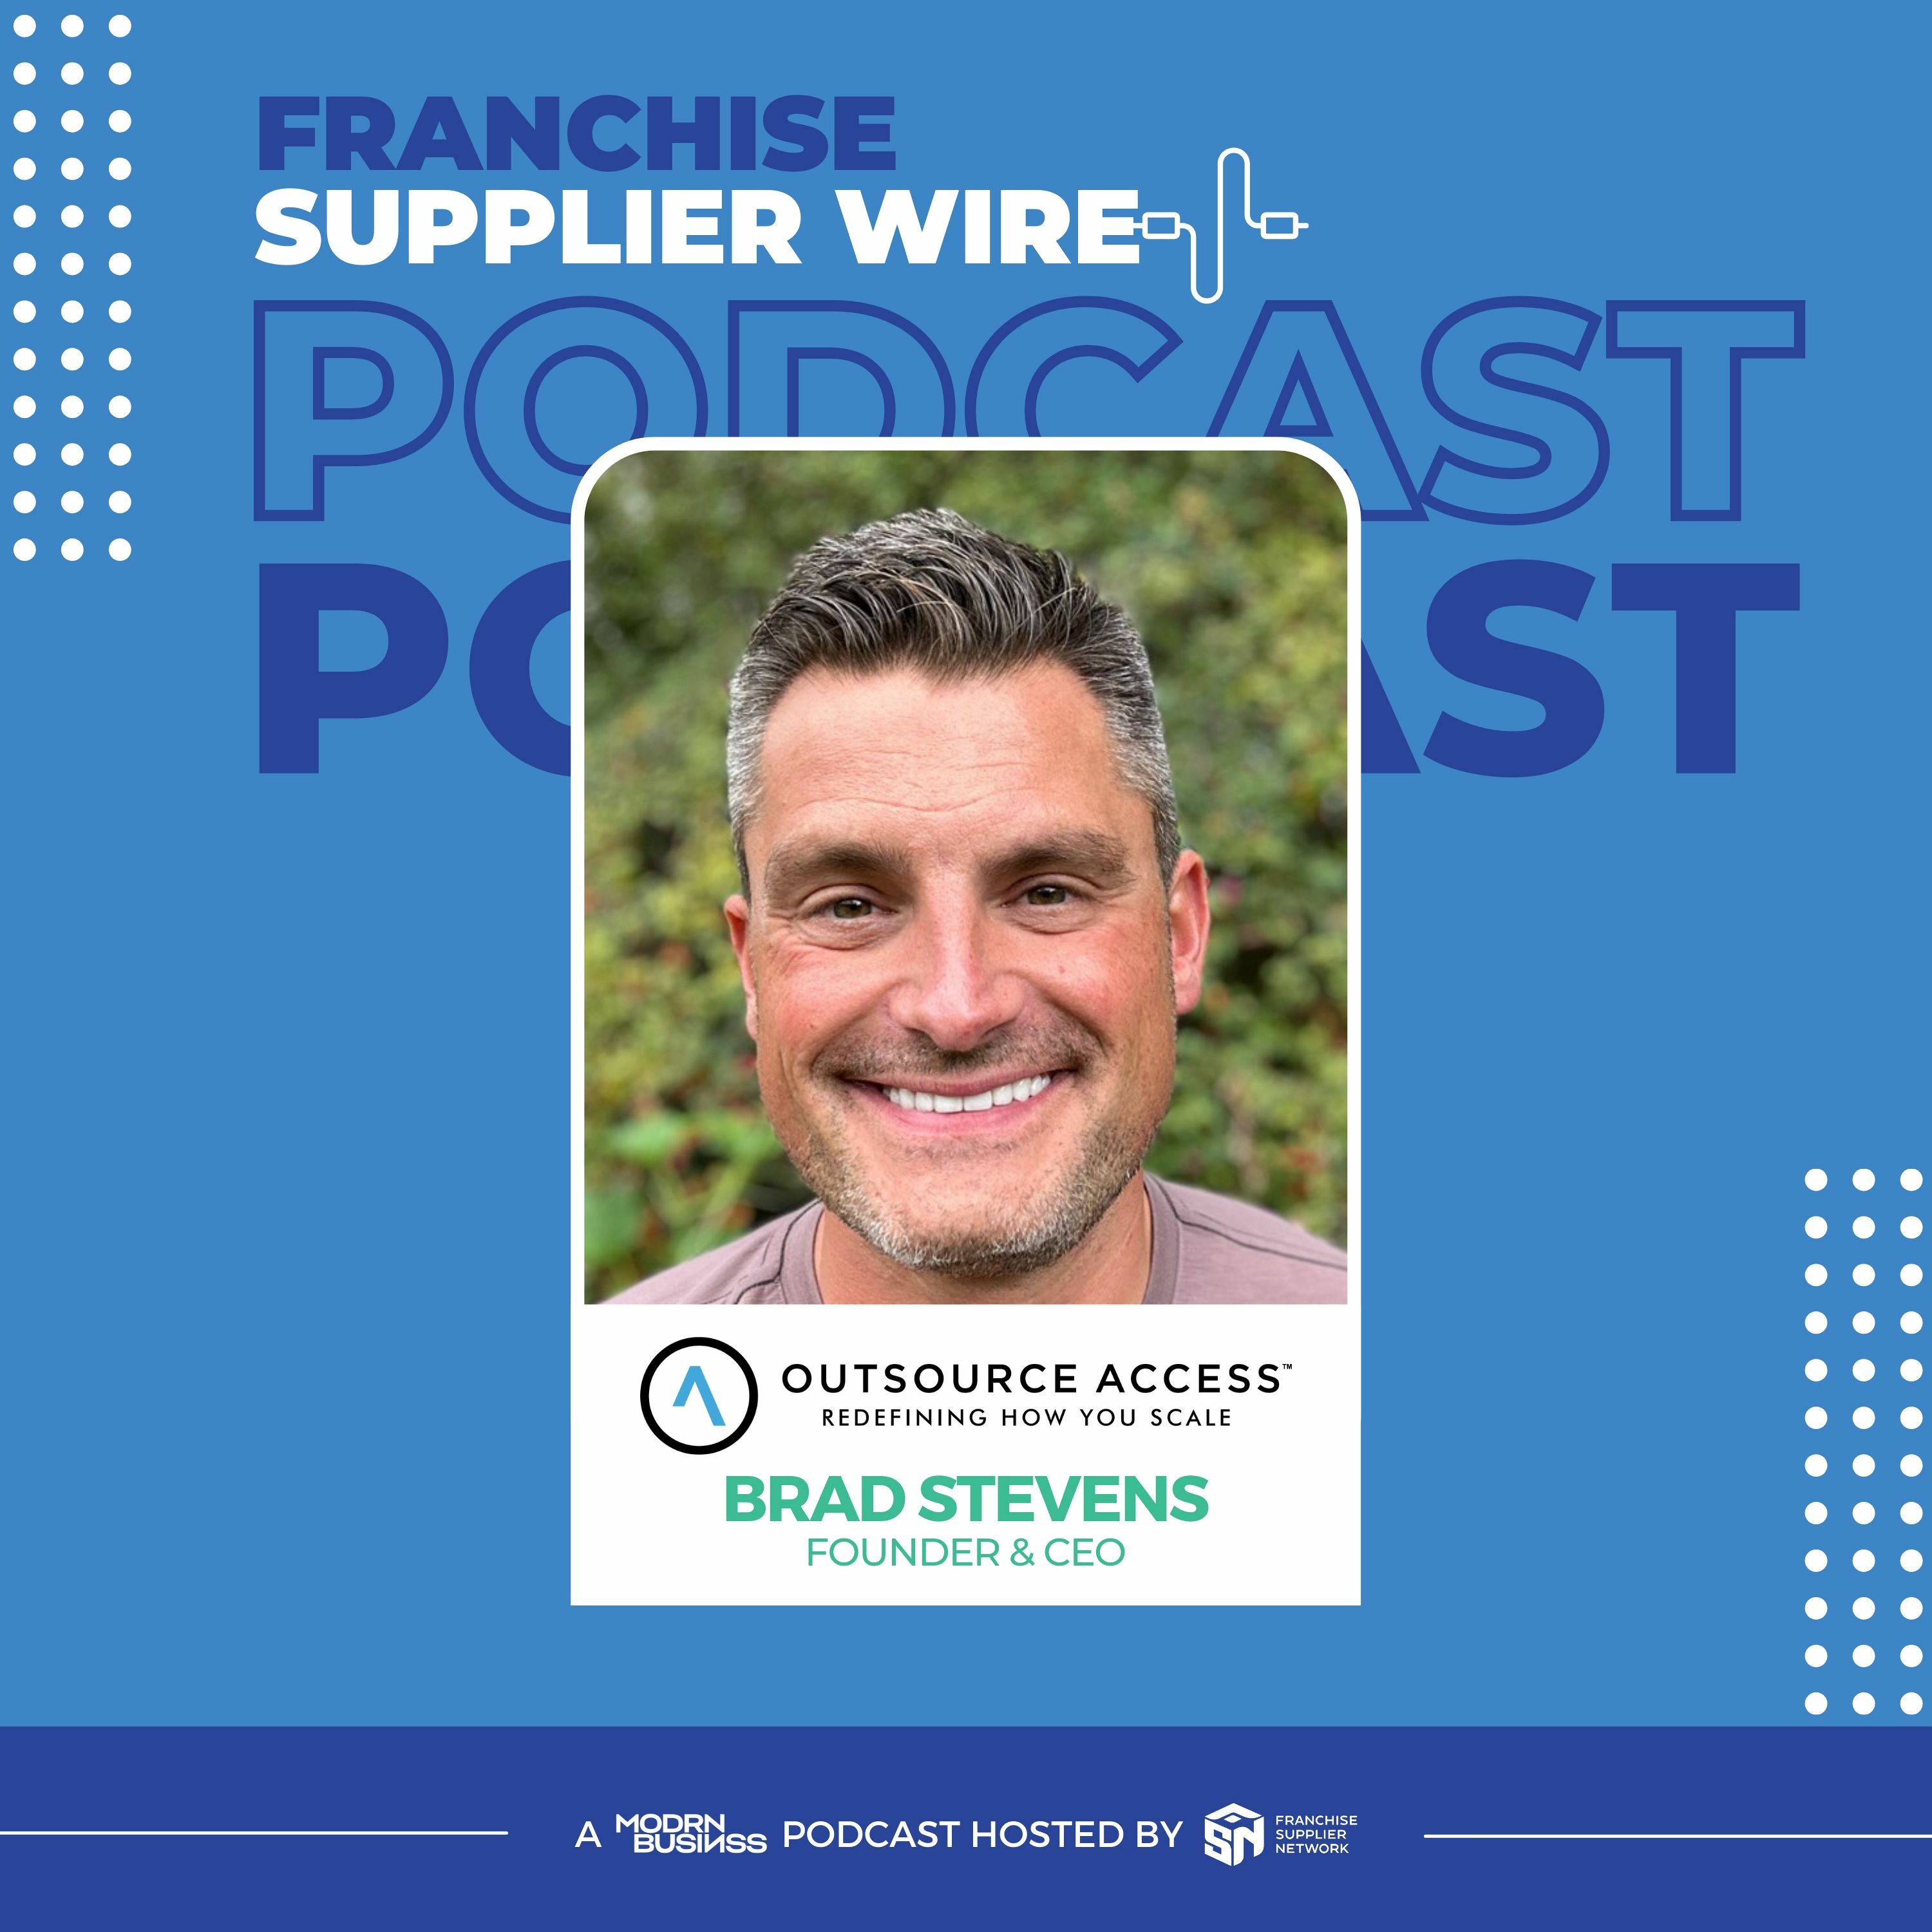 Supplier Wire 037: Using Affordable Offshore Talent to Scale Your Franchise